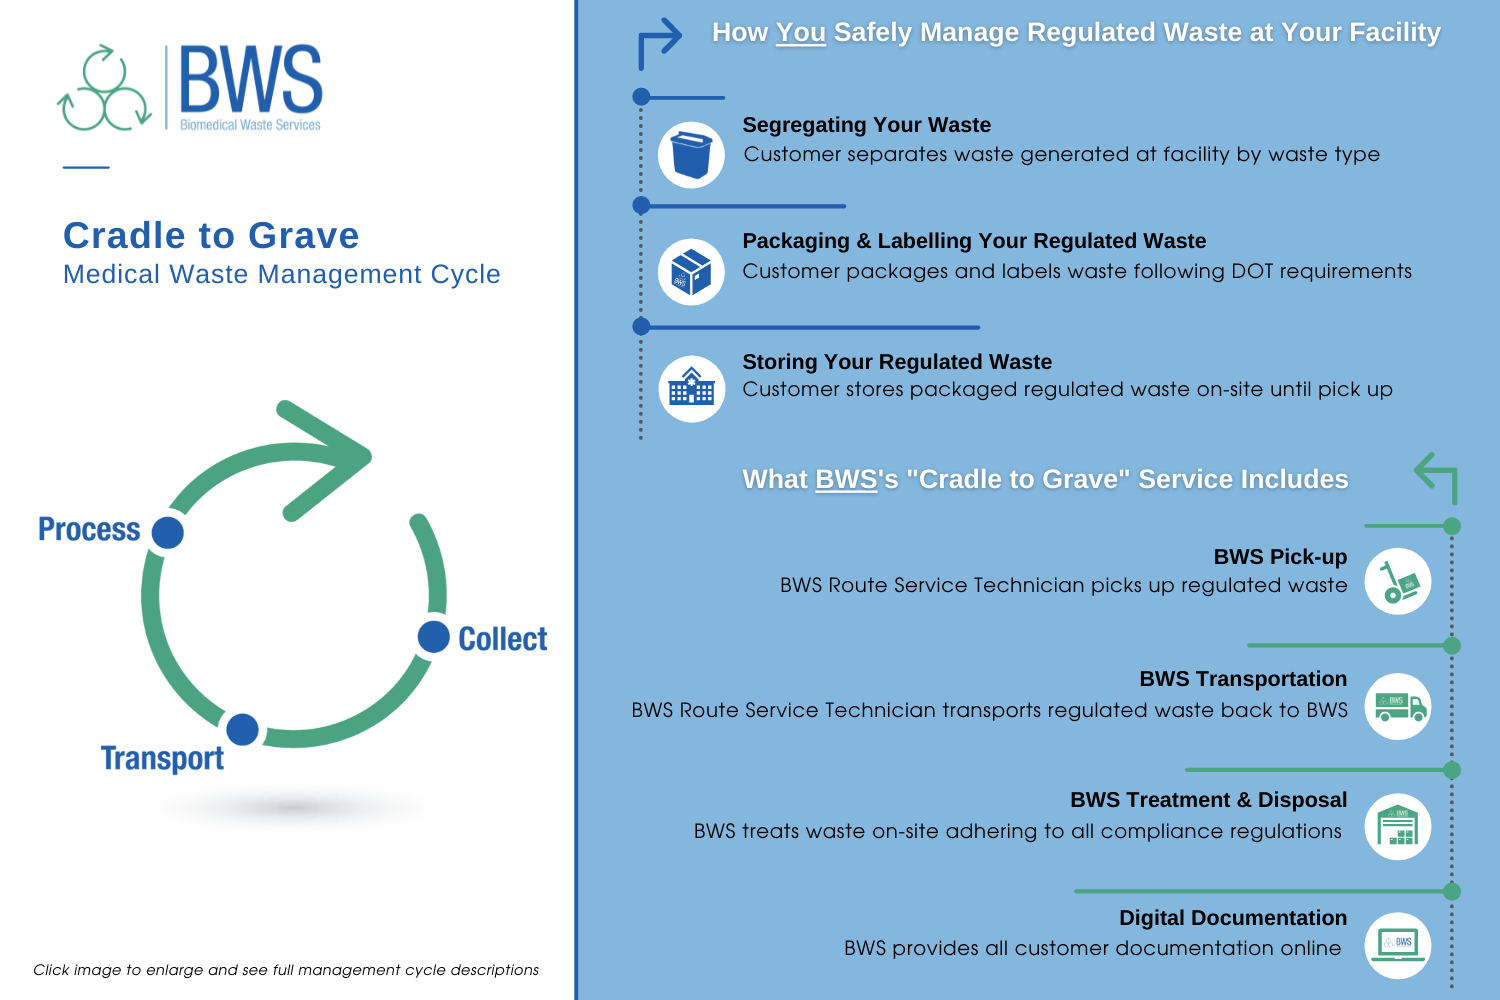 BWS Cradle to Grave Medical Waste Management Cycle graphic